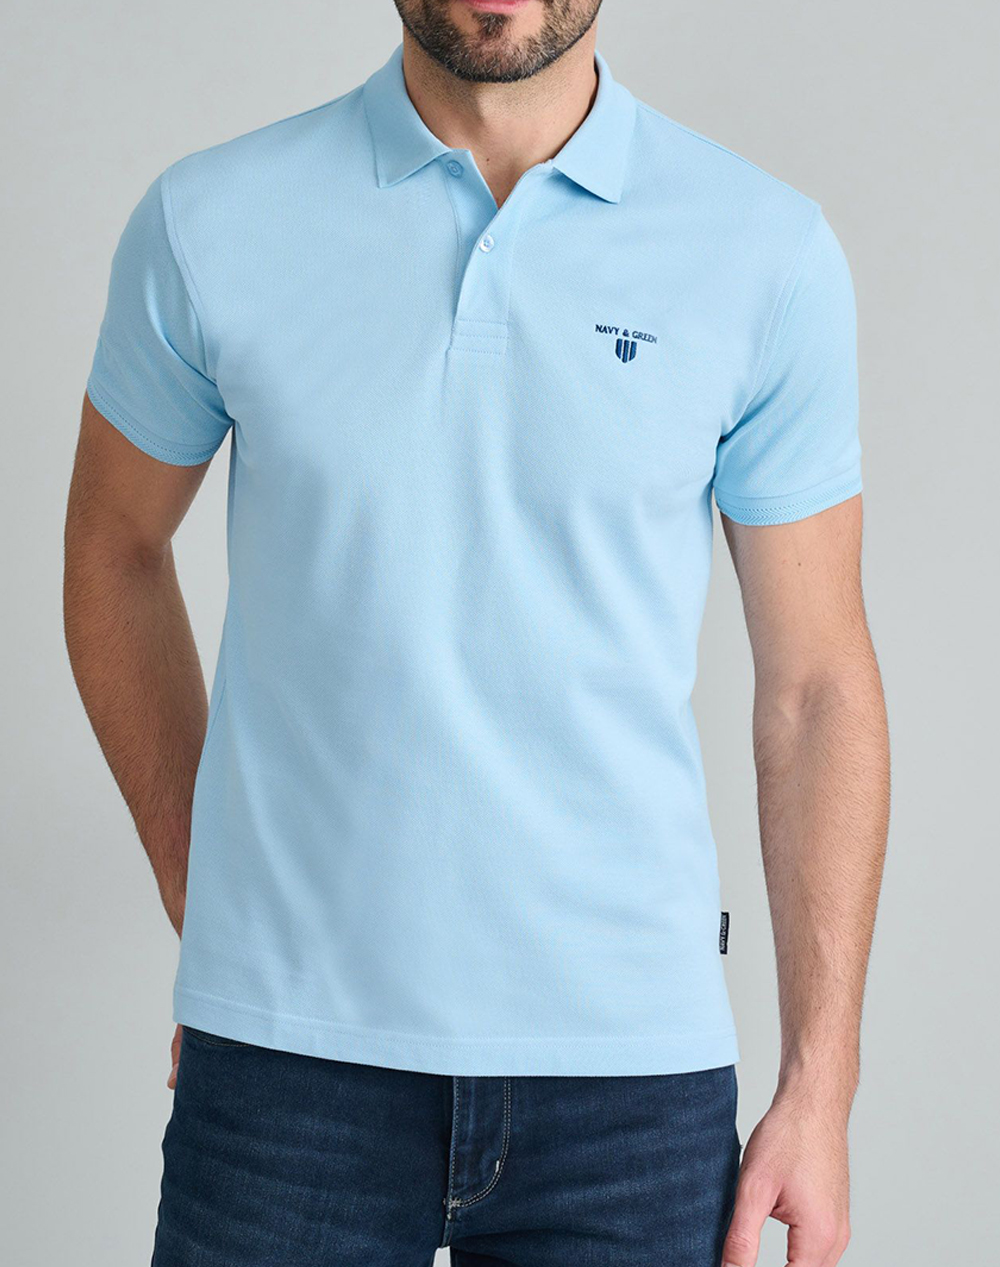 NAVY&GREEN POLO ΜΠΛΟΥΖΑΚΙ-YOUNG LINE 24EY.007/PL/YL-Dream Blue SkyBlue 3820PNAVY3410092_XR06612